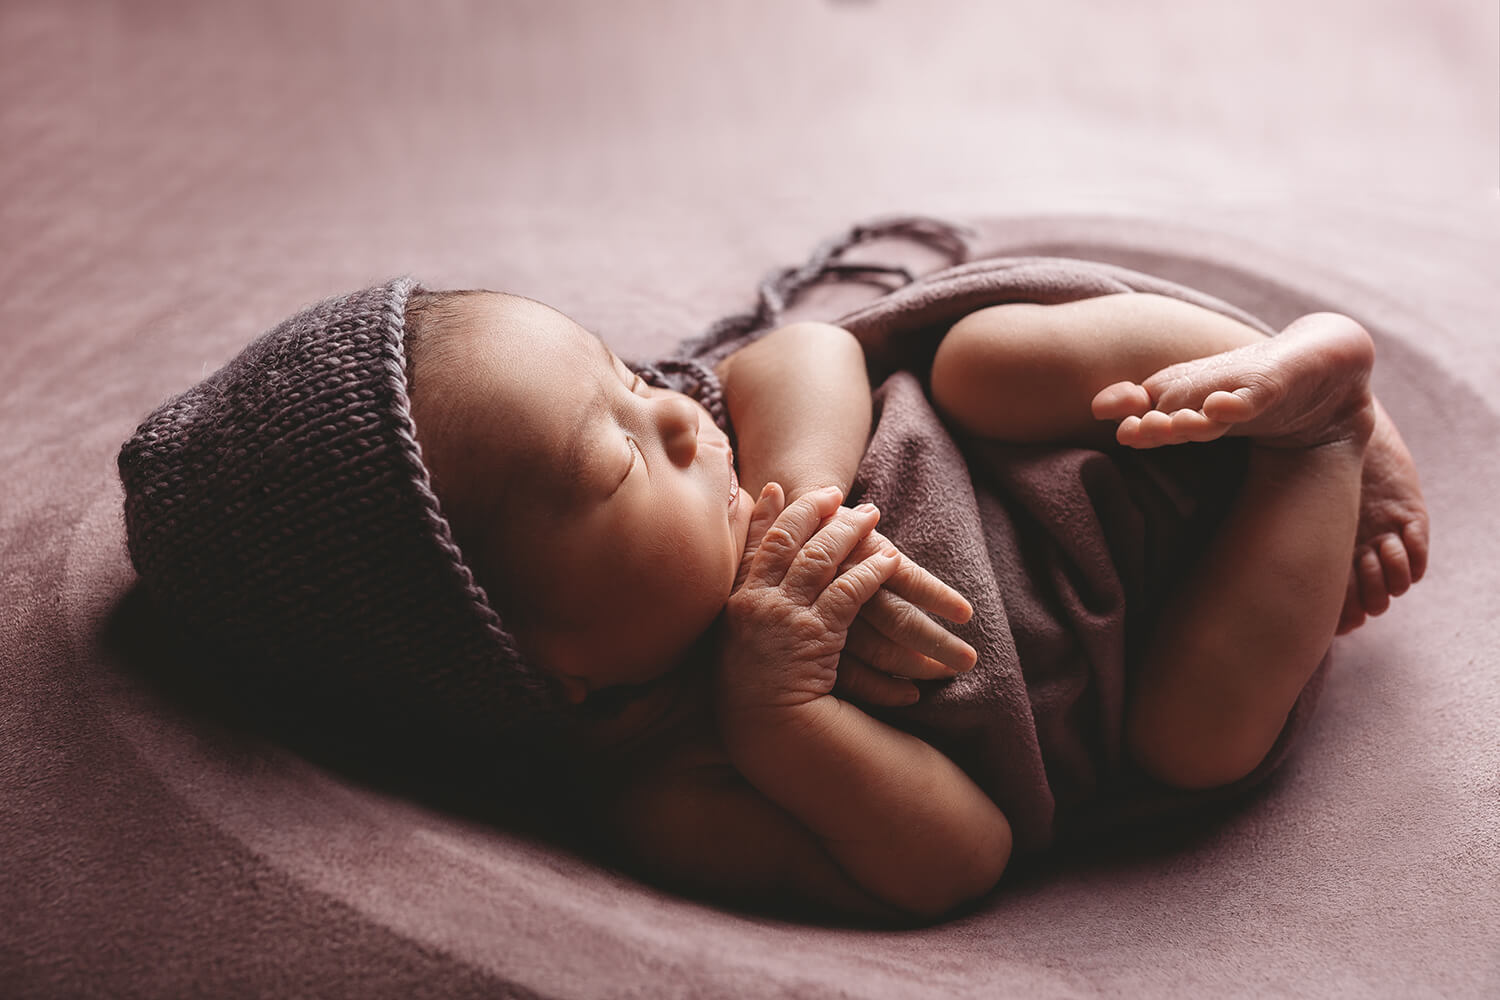 Photo of baby curled up in a blanket and knit hat.